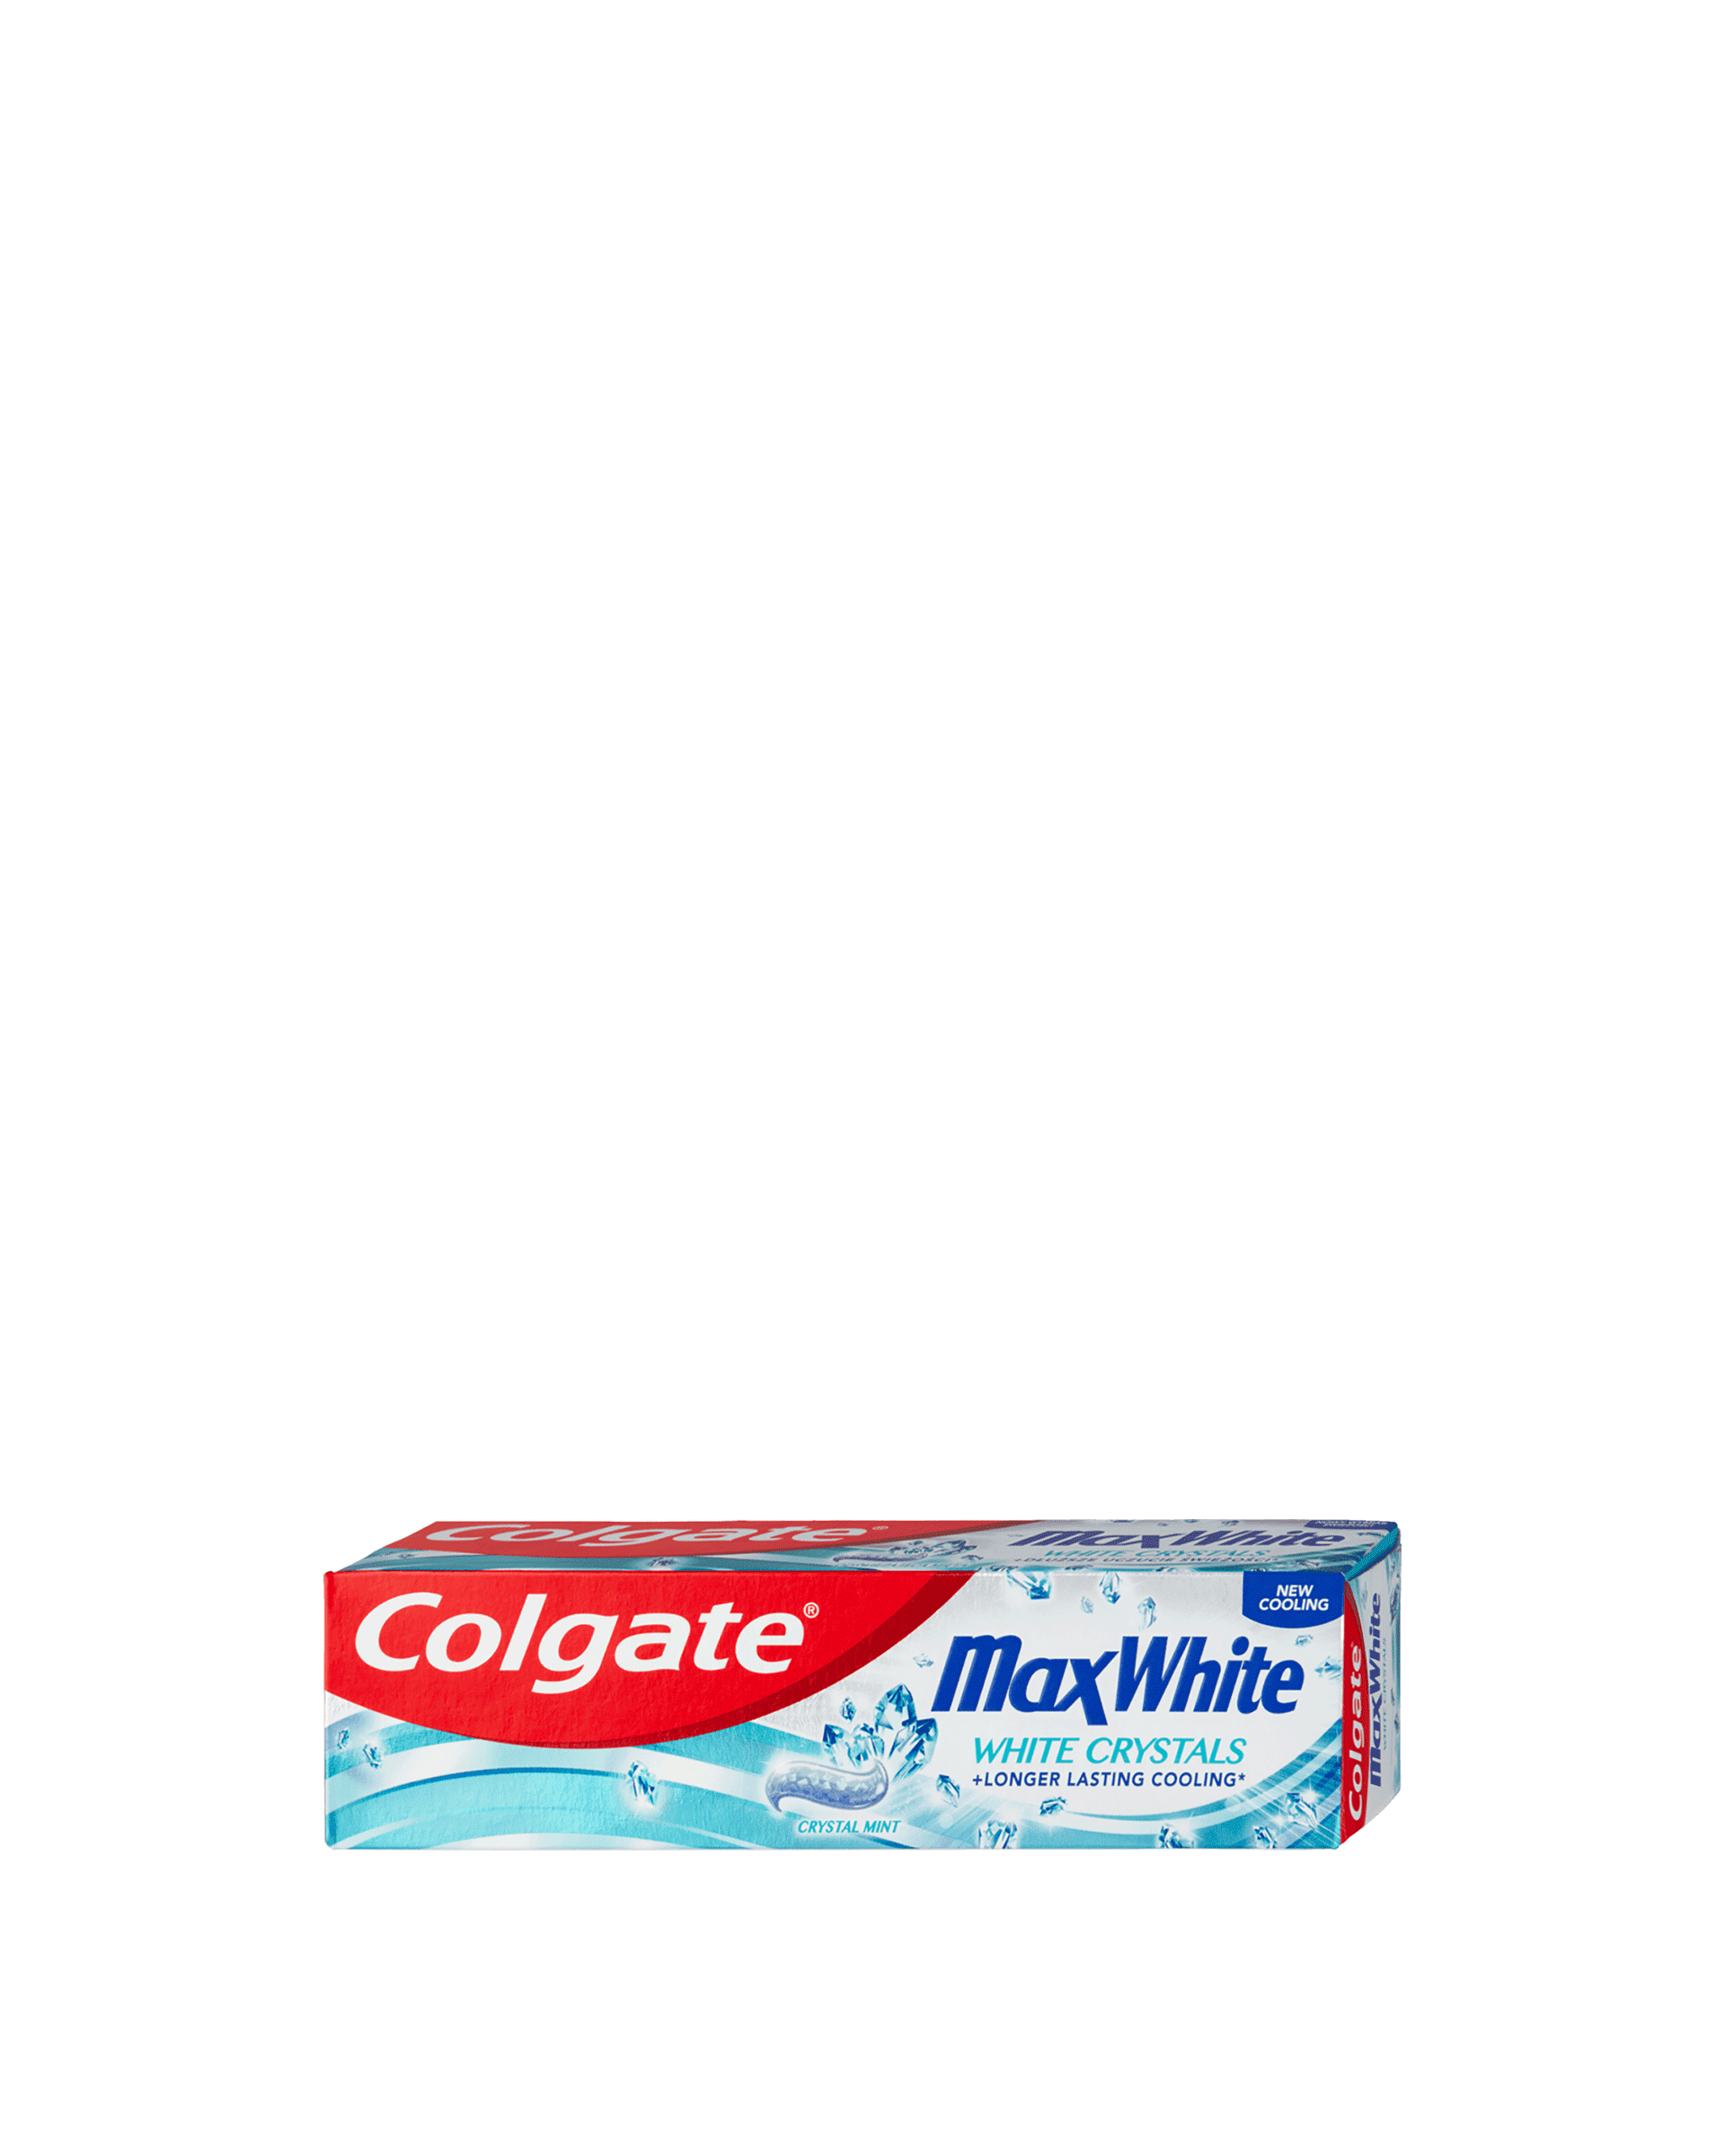 Colgate Toothpaste Max White Crystals